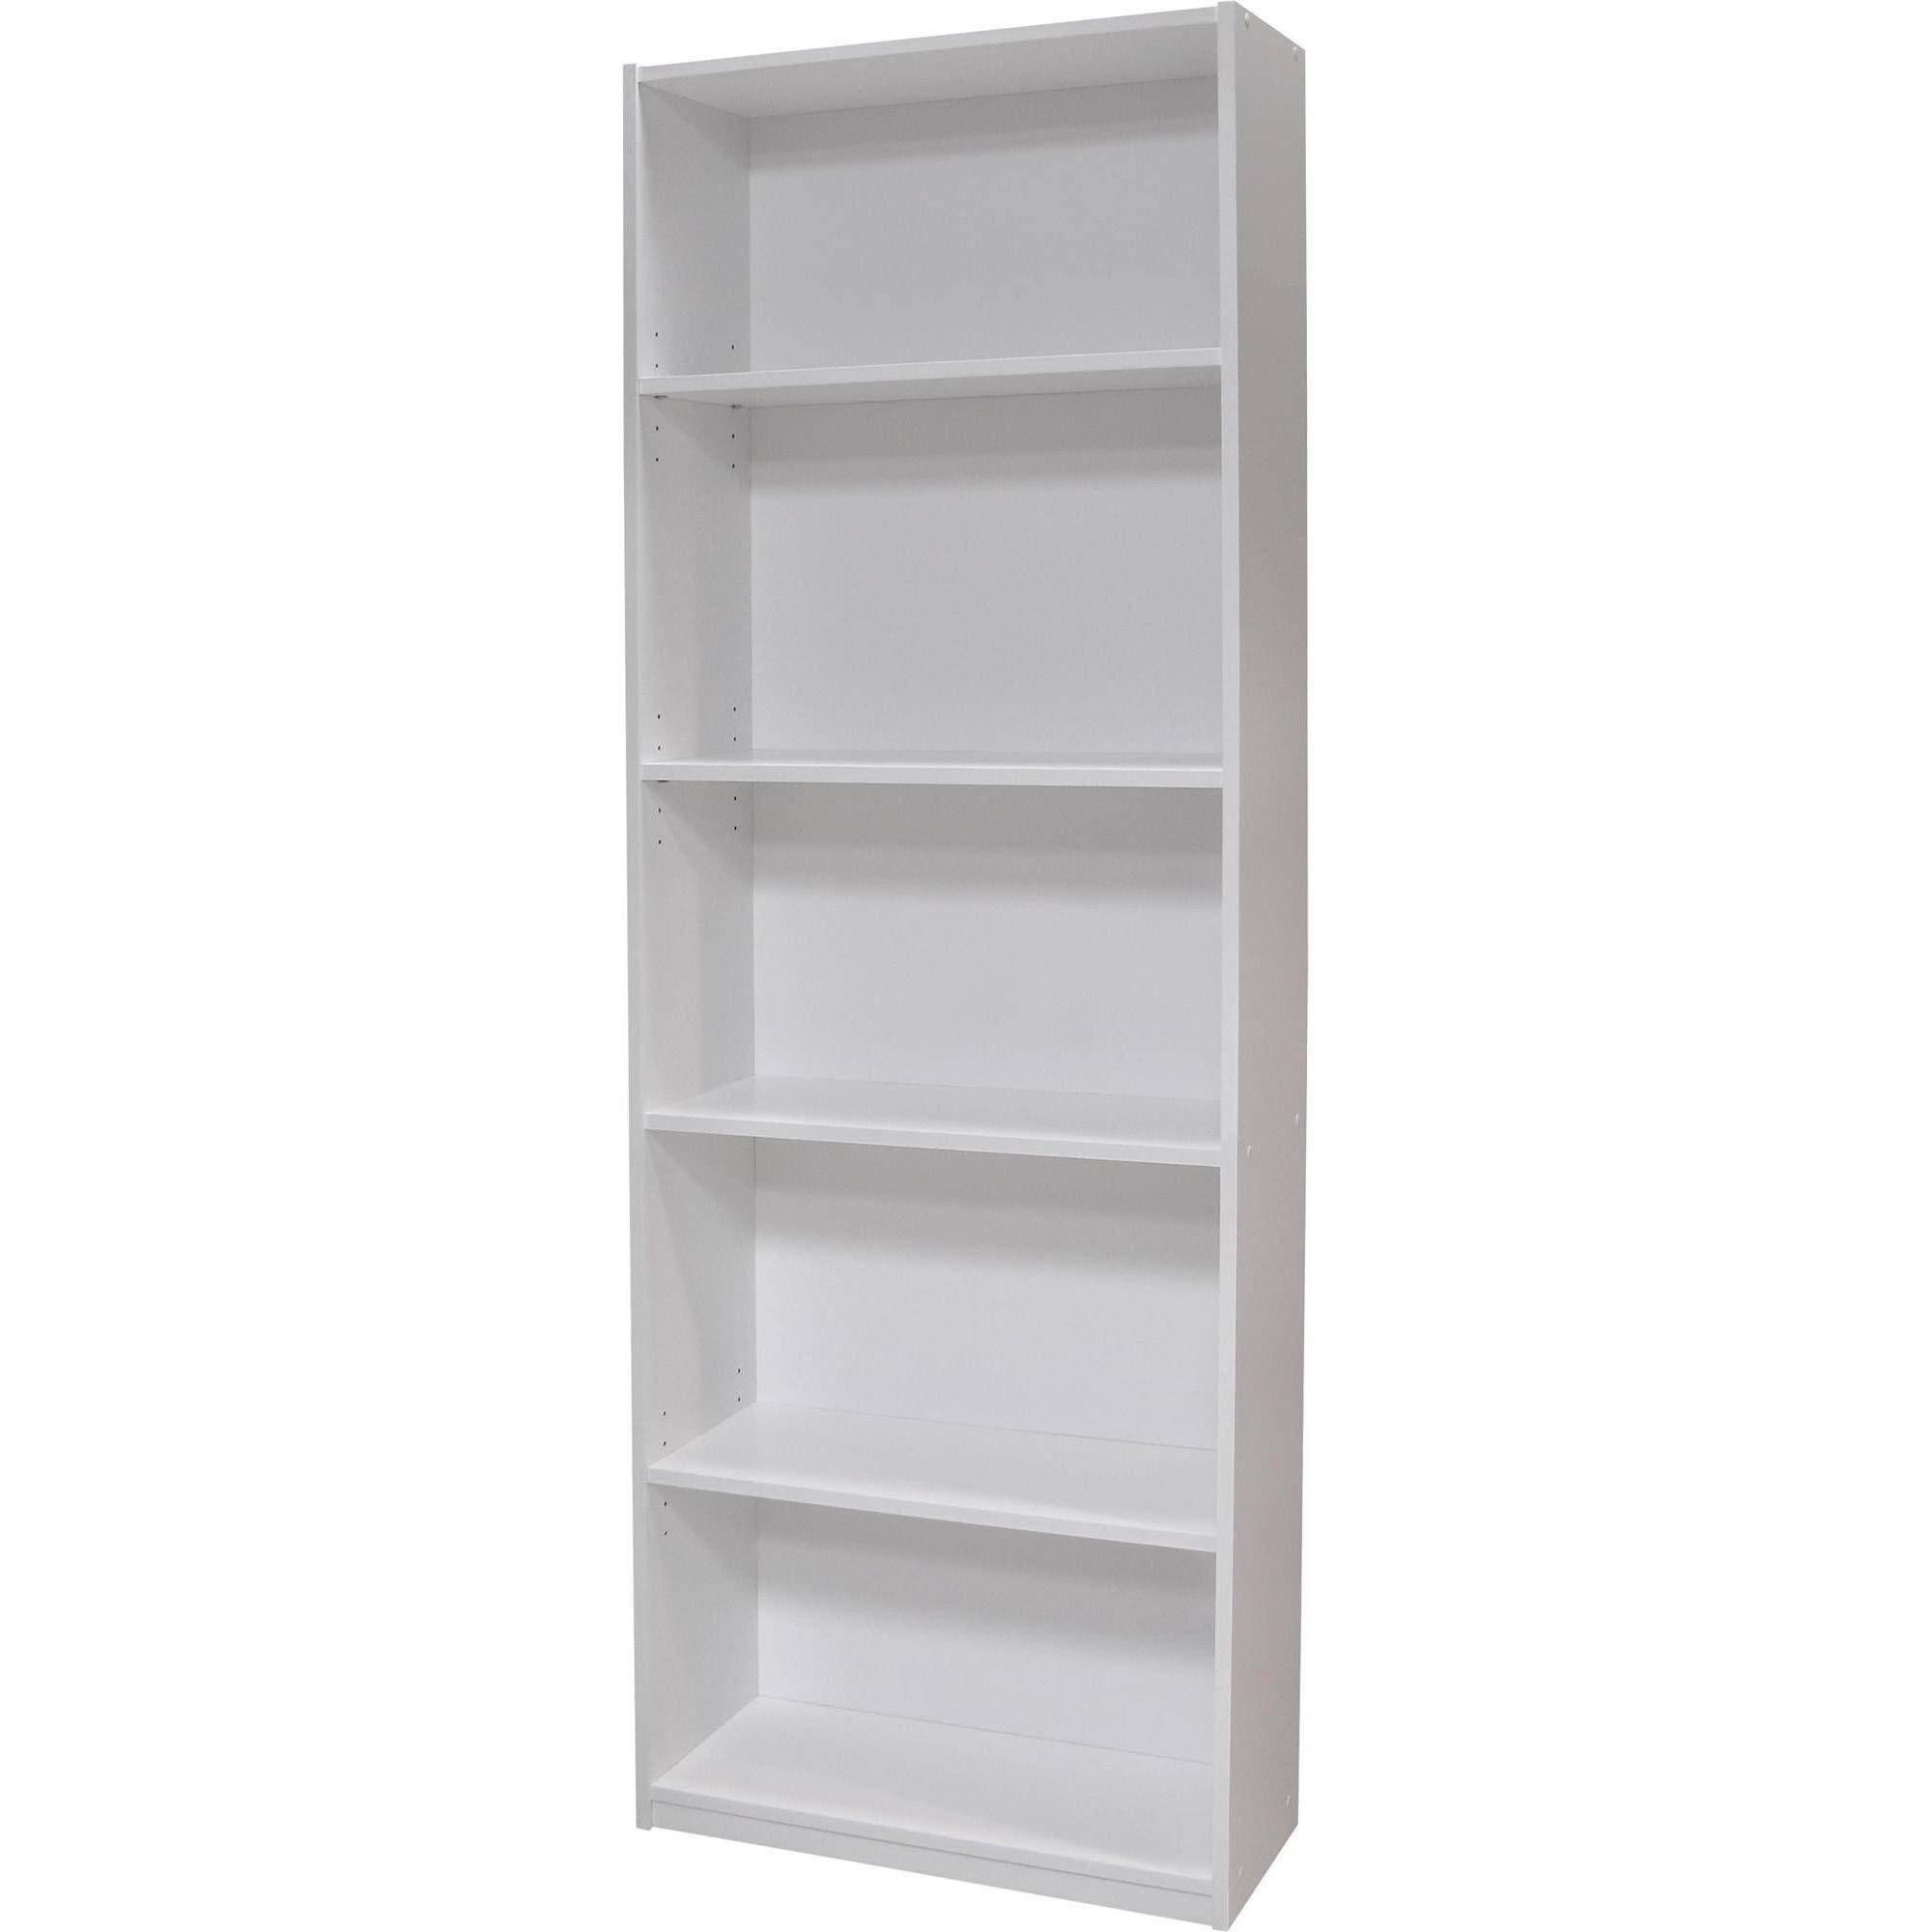 Ameriwood 5 Shelf Bookcases, Set Of 2 (mix And Match) – Walmart Regarding Well Known Walmart White Bookcases (View 4 of 15)